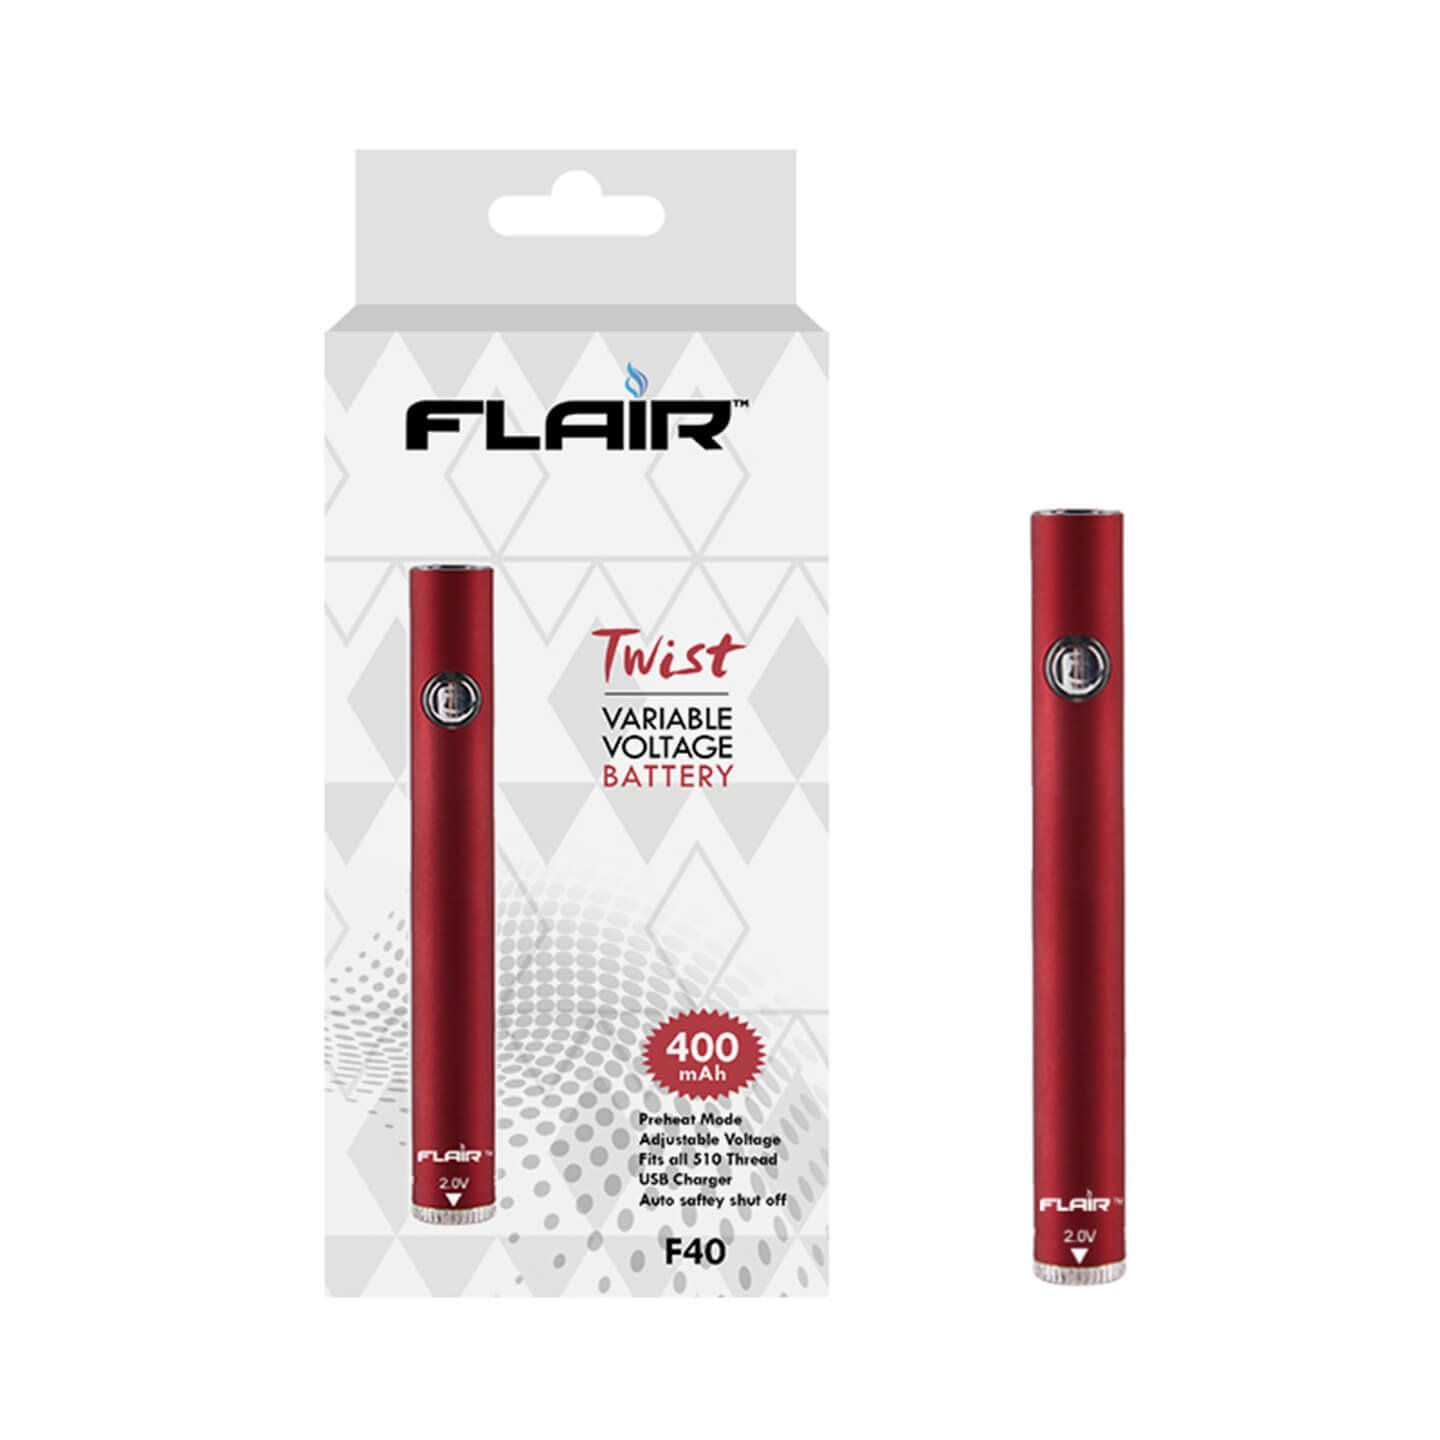 Flair Twist variable voltage battery 400mah(Red) F40